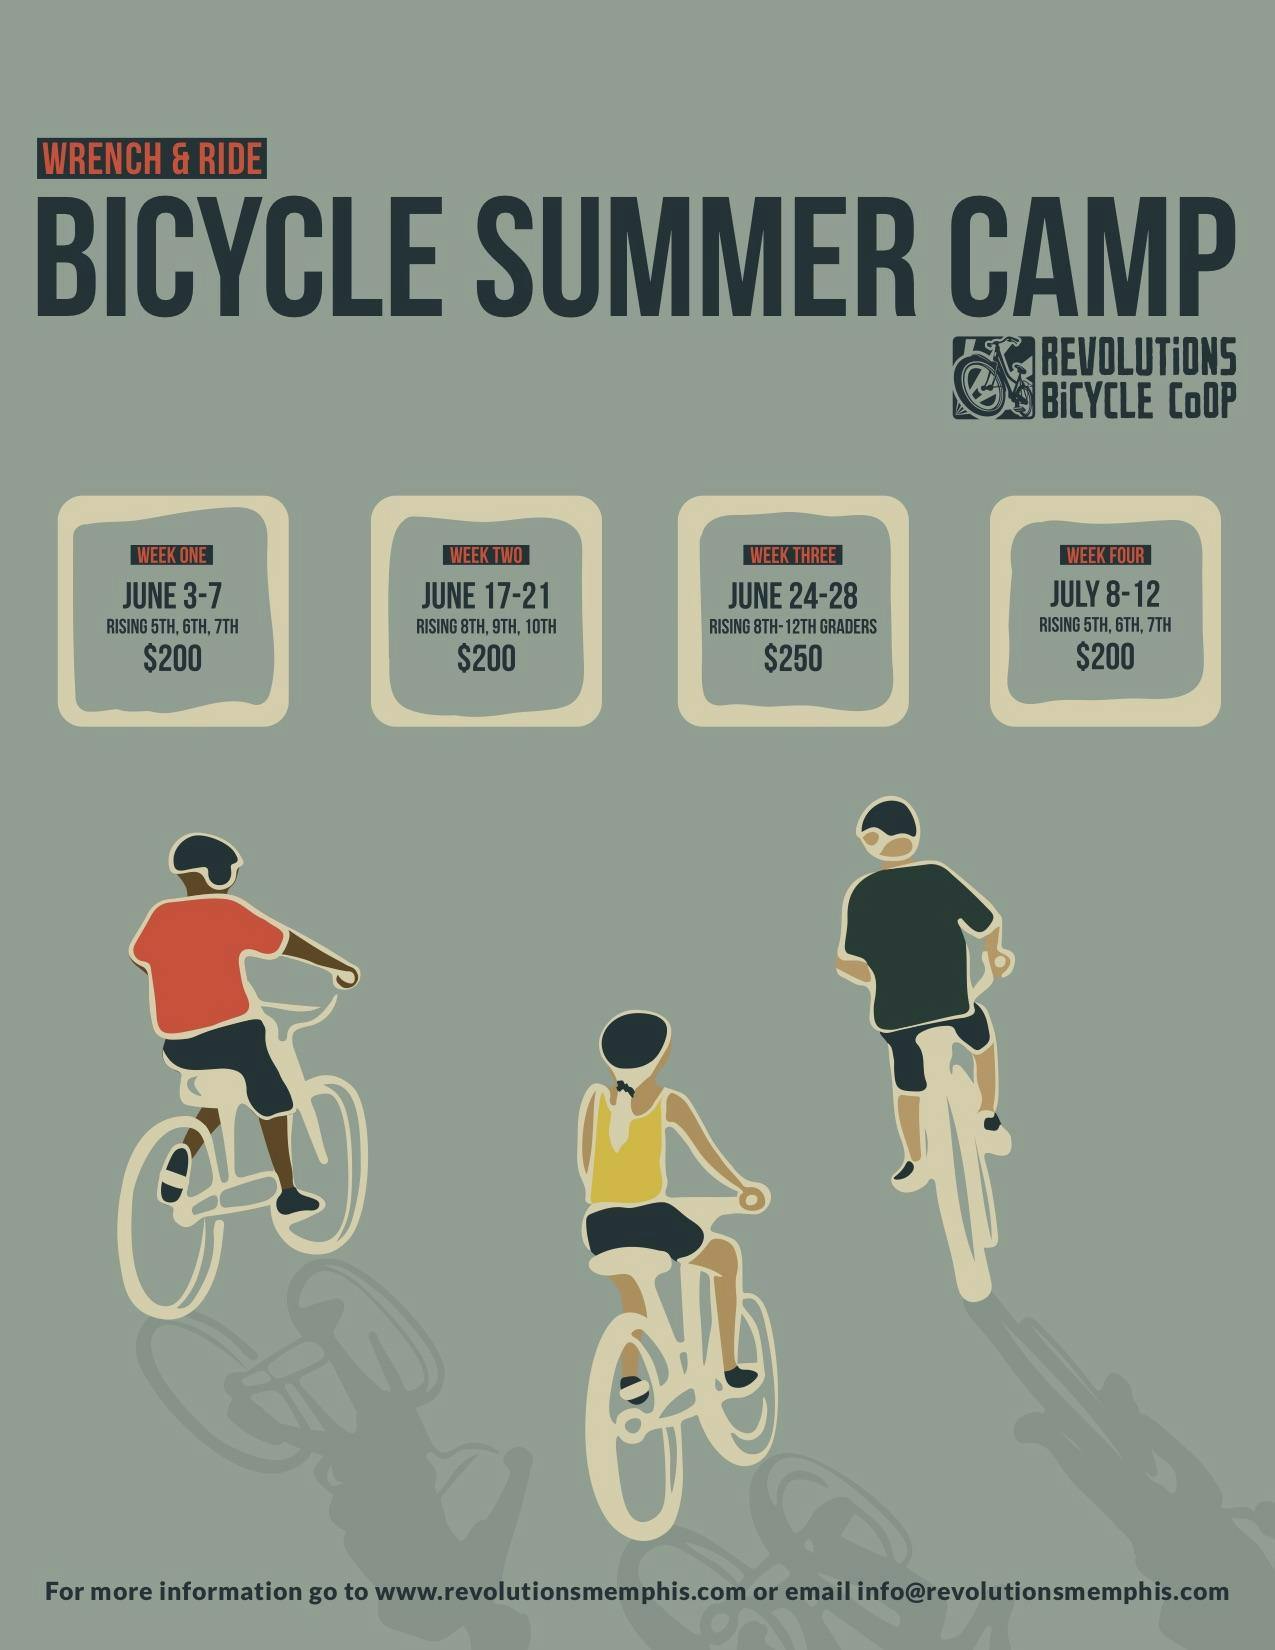 Wrench & Ride Bicycle Summer Camp 2019 - Grades 8,9,10